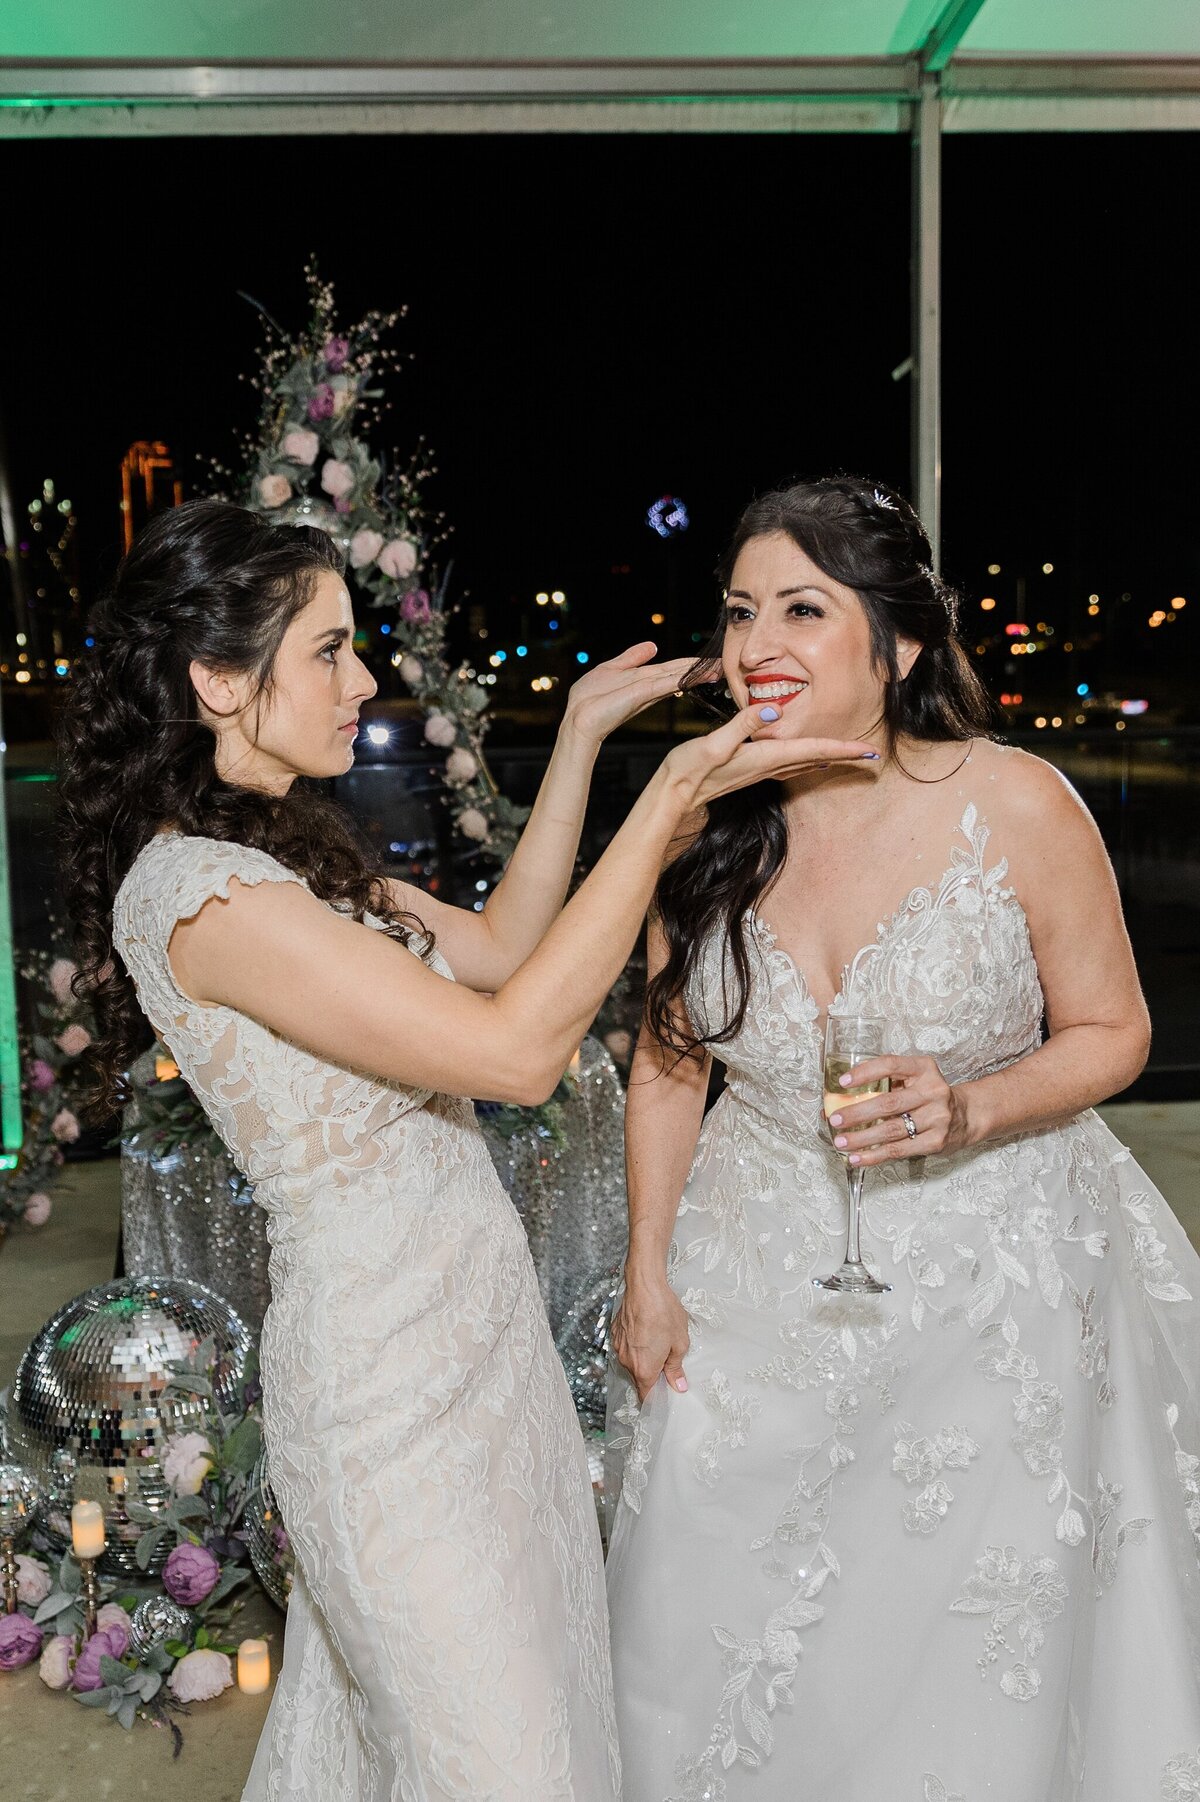 A photo of one bride playfully framing another bride's face during their wedding reception in Dallas, Texas. The bride on the left is wearing a short sleeve, intricate, white dress. The bride on the right is wearing a sleeveless, long, flowing, intricate, white dress and is holding a glass of champagne.